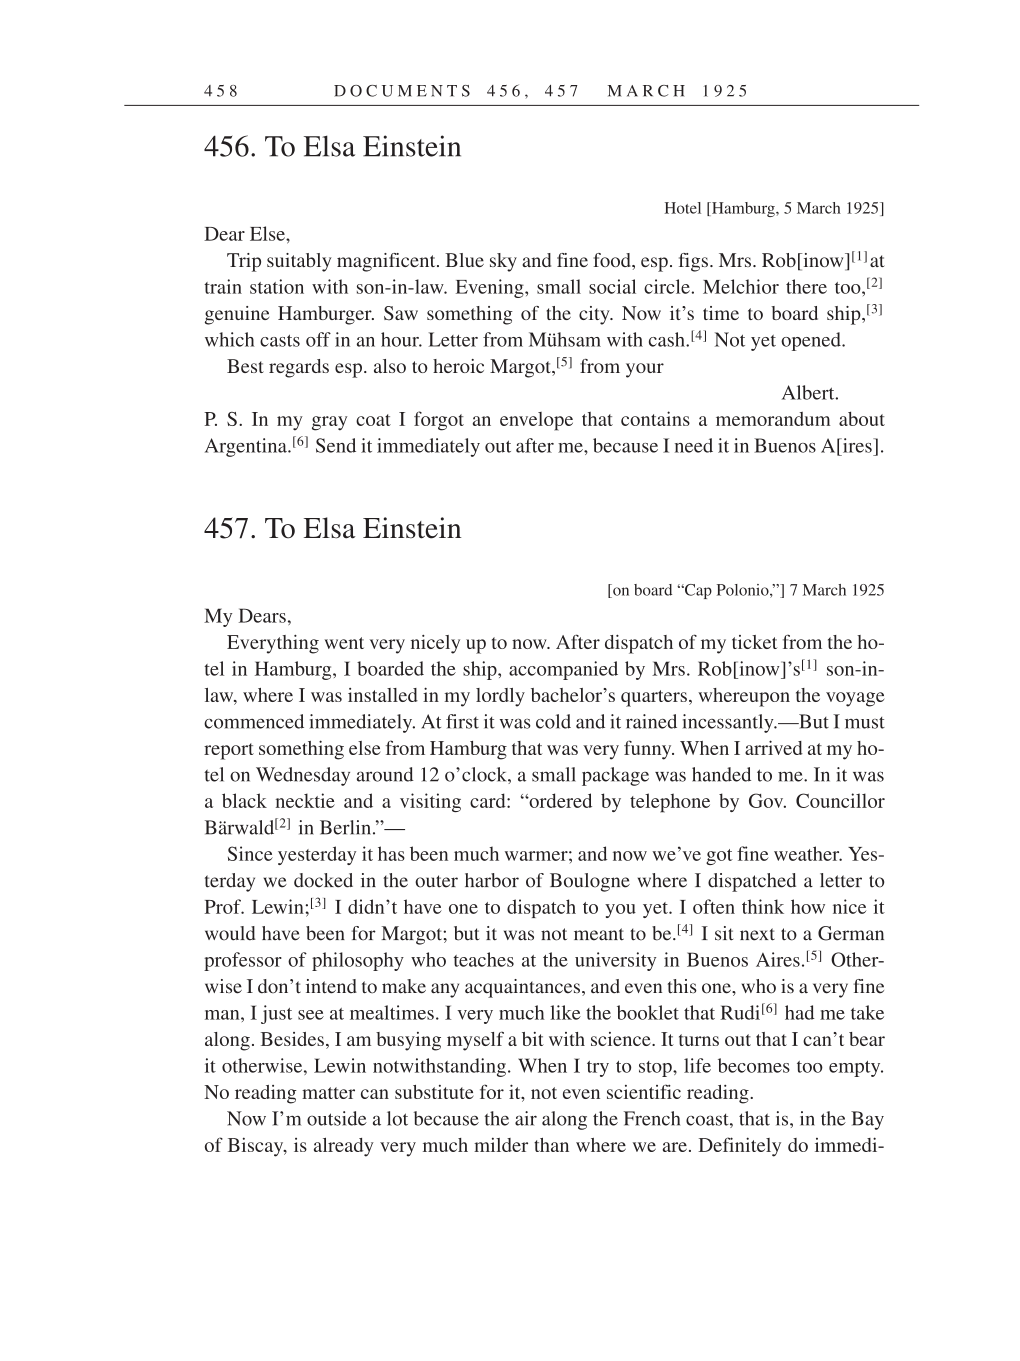 Volume 14: The Berlin Years: Writings & Correspondence, April 1923-May 1925 (English Translation Supplement) page 458